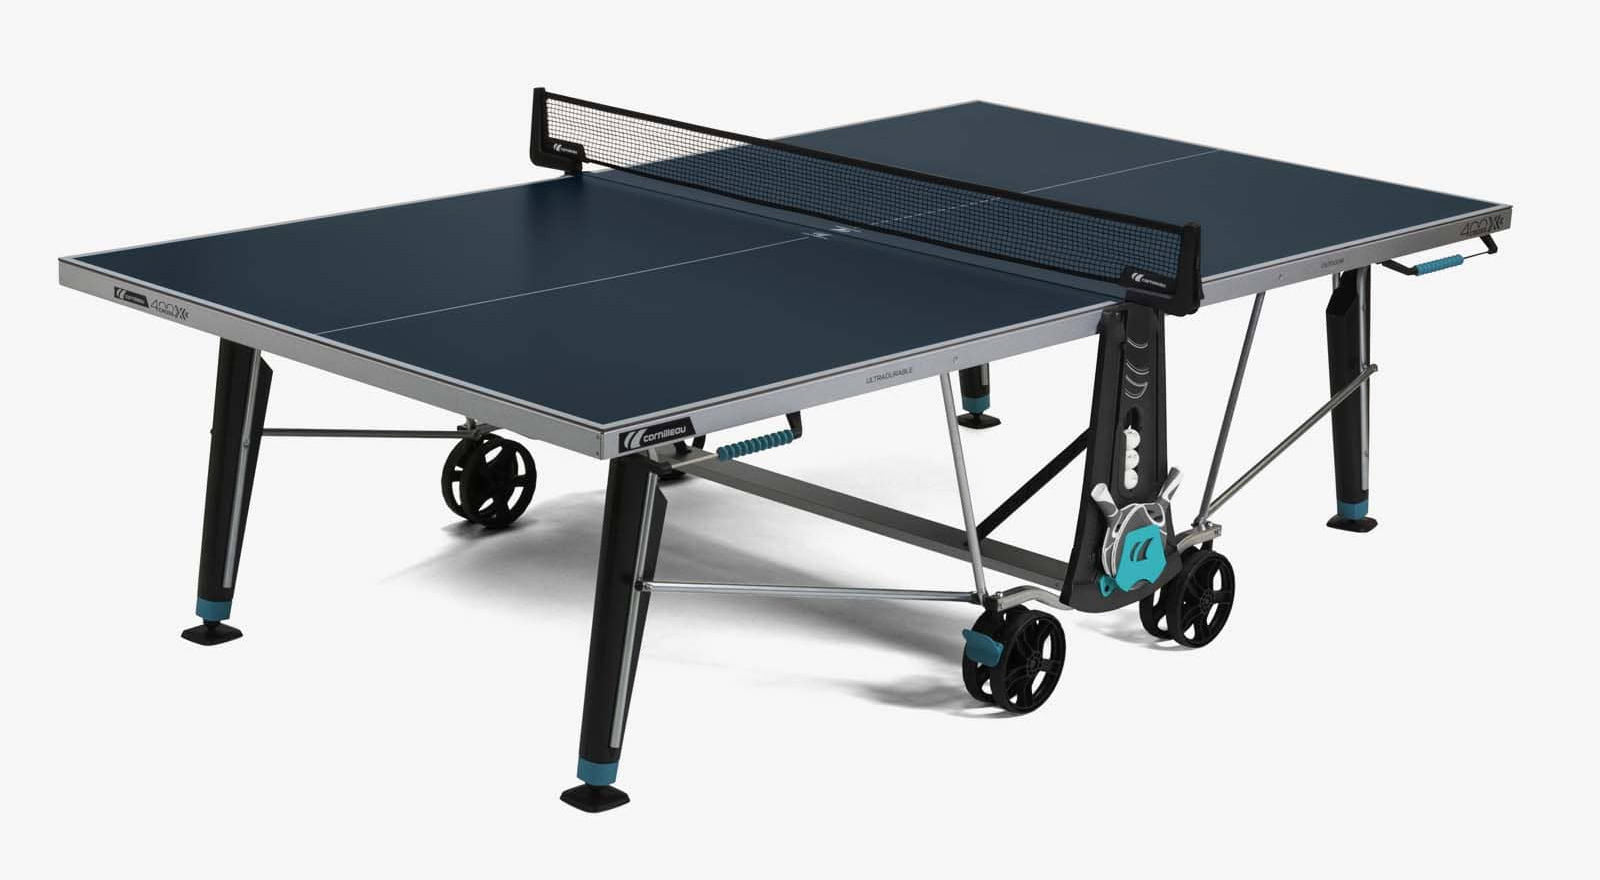 Oven Uitgaand Halve cirkel Cornilleau 400X Outdoor Ping Pong Table